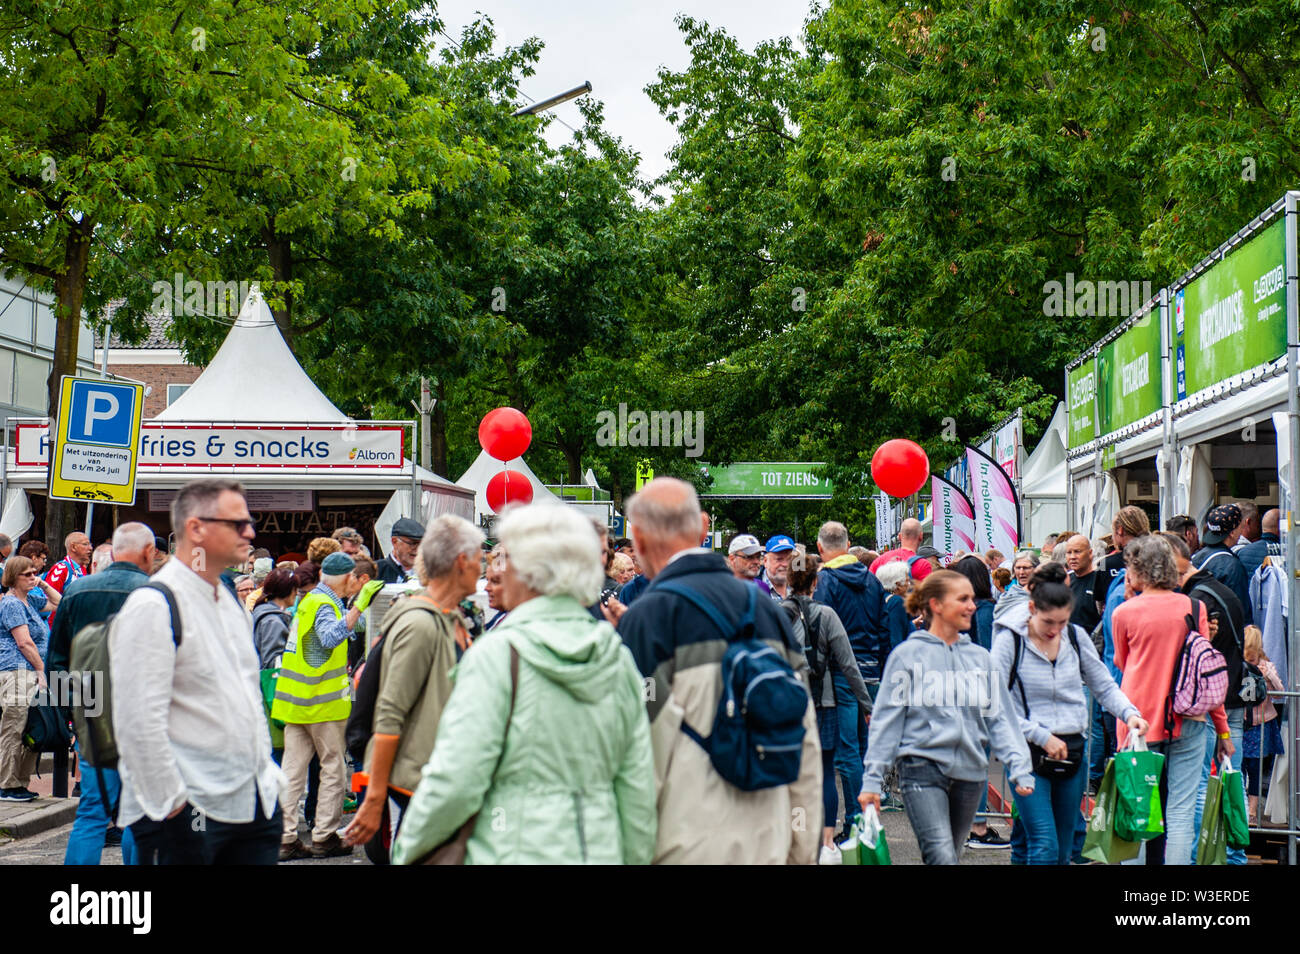 Participants buy official products before the walking event.The International Four Days Marches, called 'Vierdaagse' in Nijmegen has grown into the largest multi-day walking event in the world. The day before, all the walkers go to pick their wristband with the number of registration at the start of the walk. Stock Photo